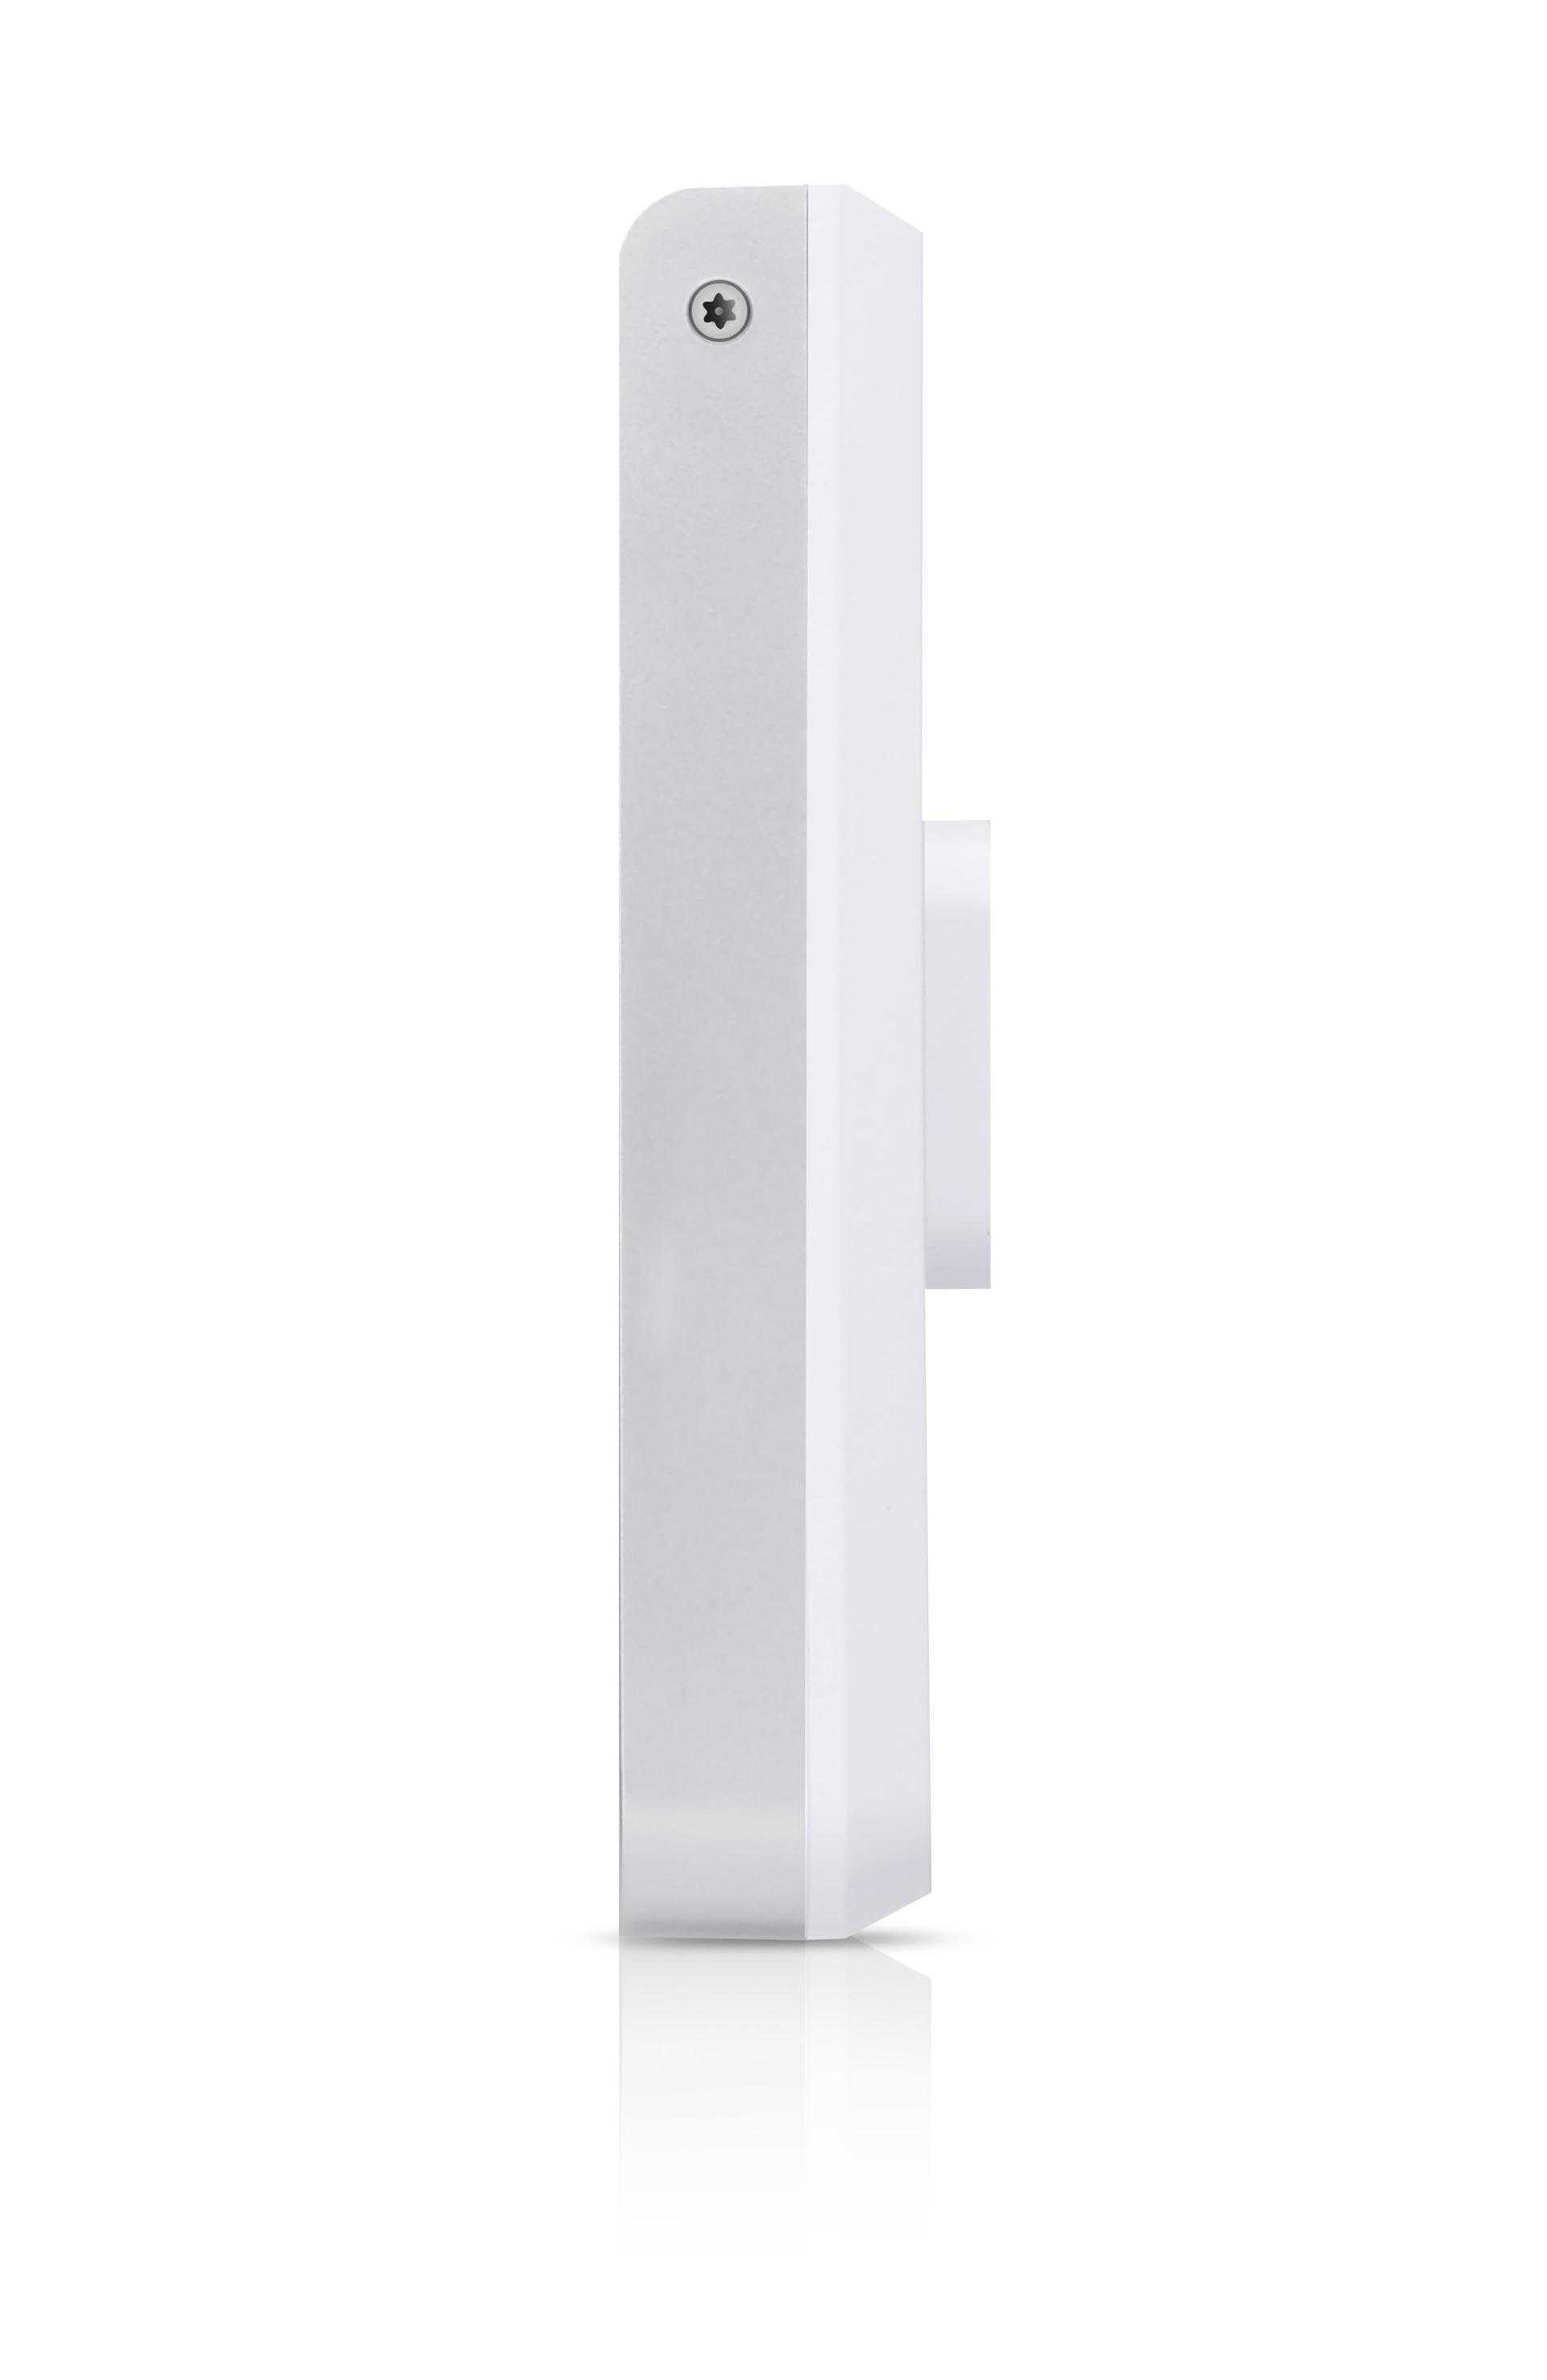 Ubiquiti UniFi UAP-IW-HD In-Wall Access Point Side Image